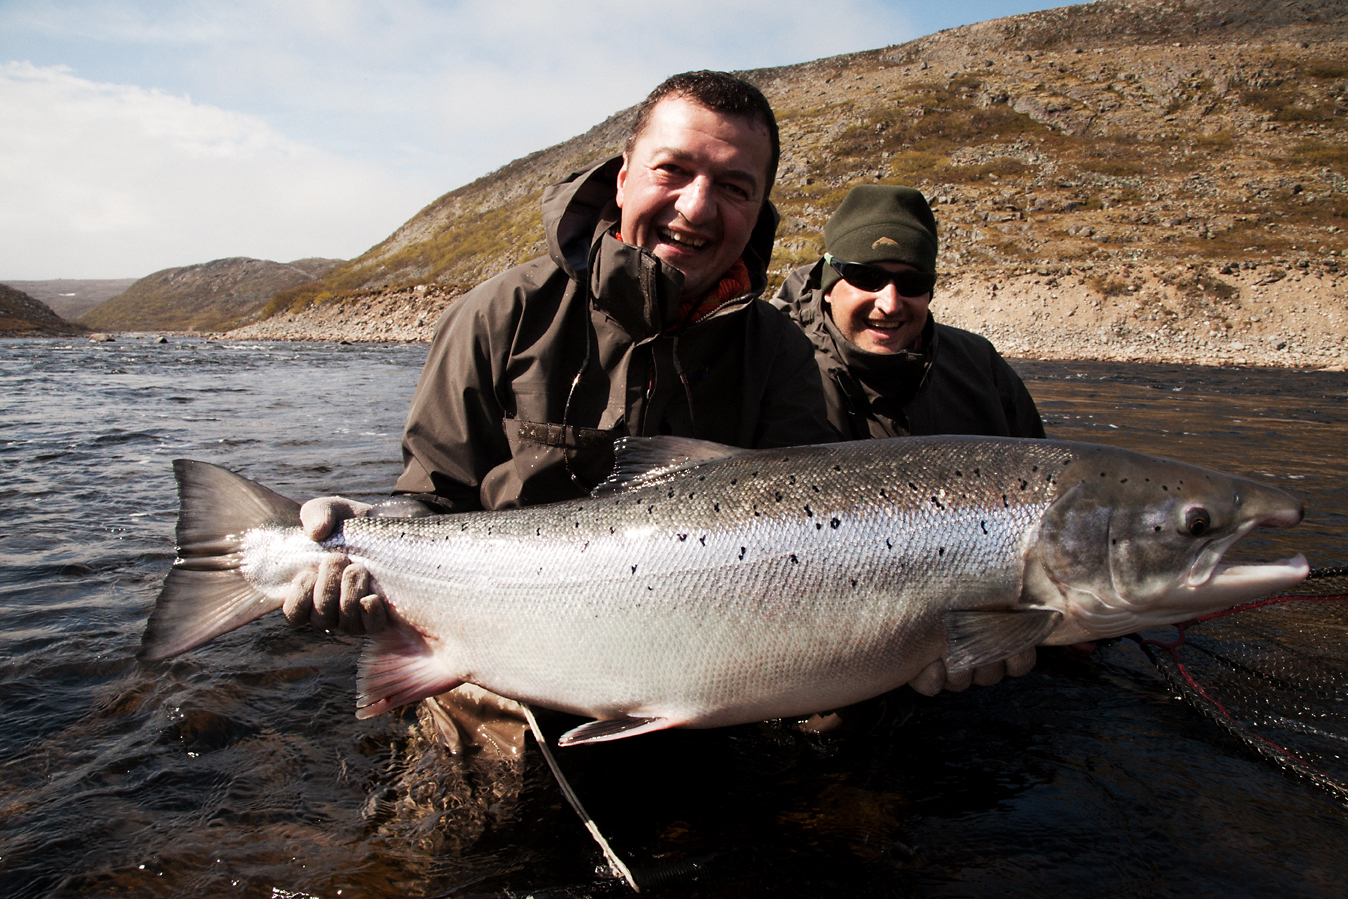 Fly Fishing the World Visits Iceland, the Land of Fire &amp; Ice for Salmon